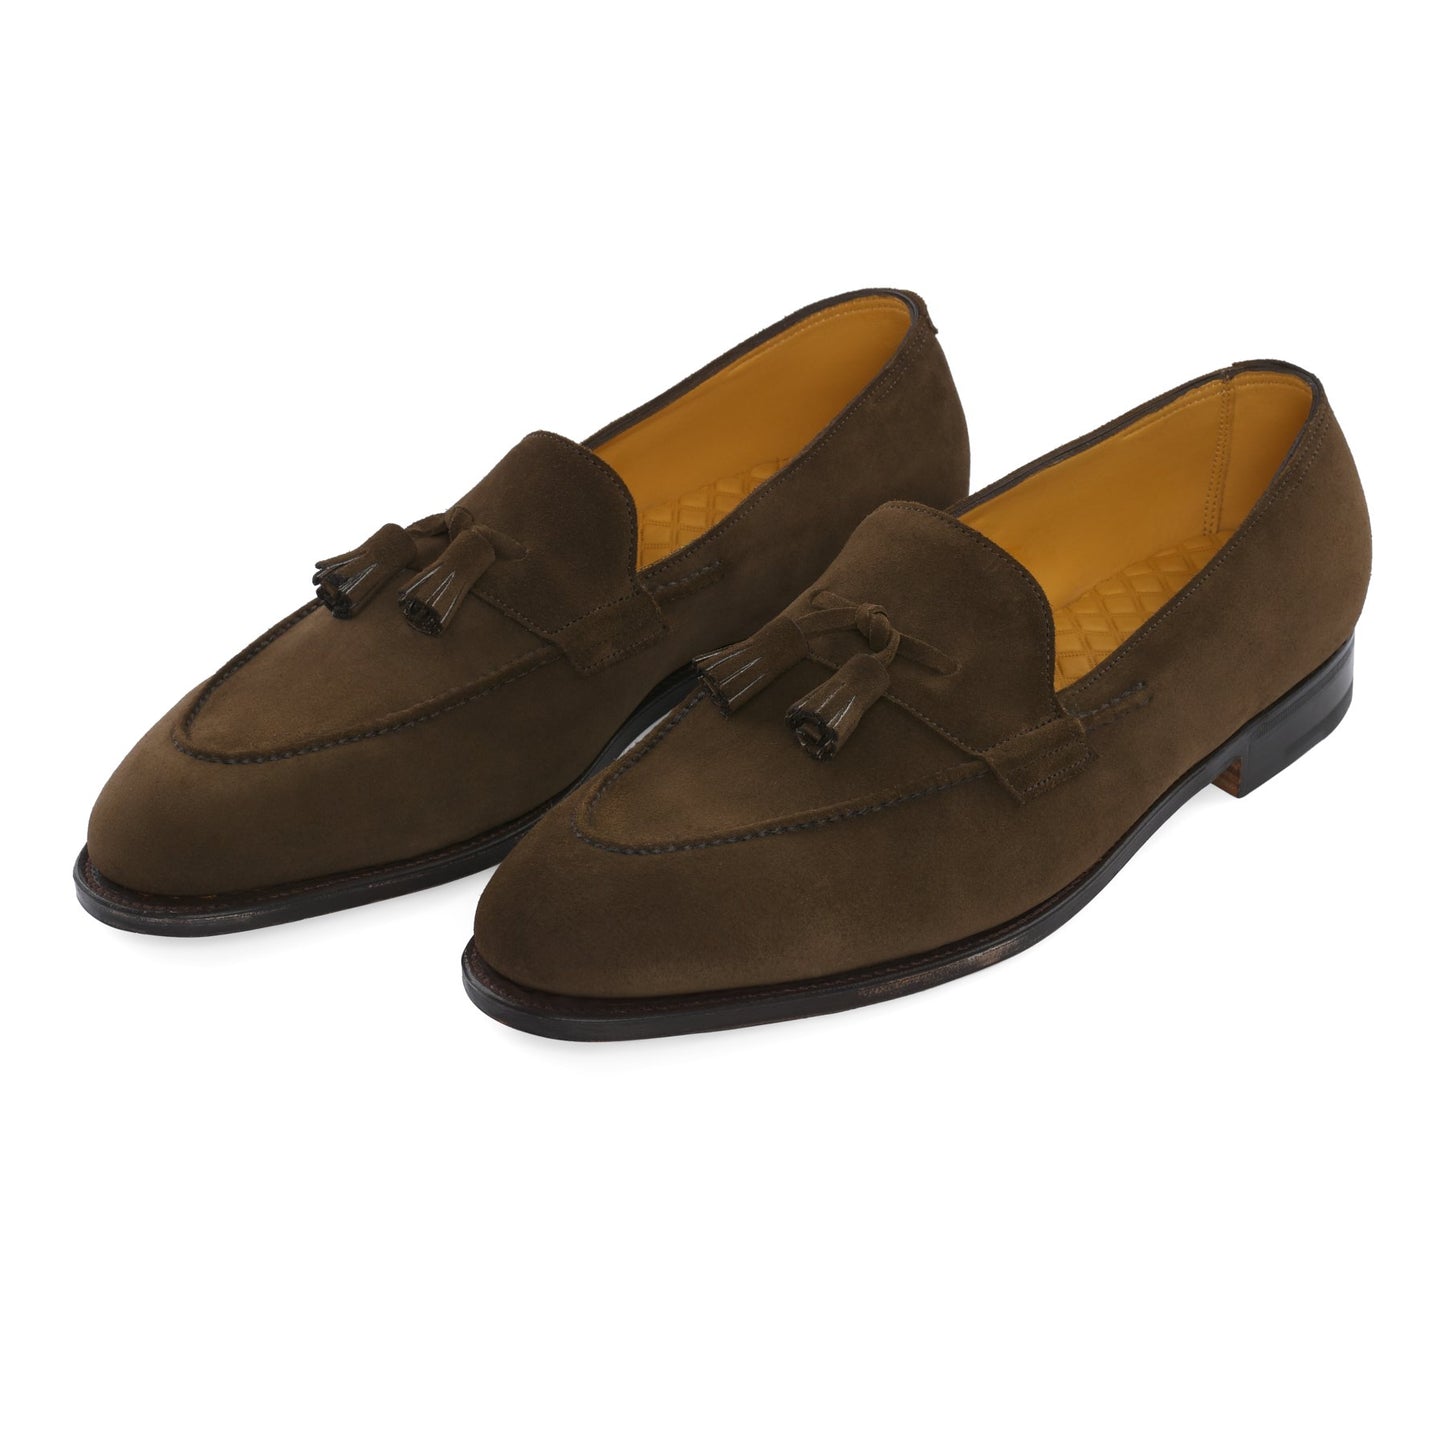 John Lobb "Callington" Suede Loafer with Hand-Stitching Apron in Pewter - SARTALE